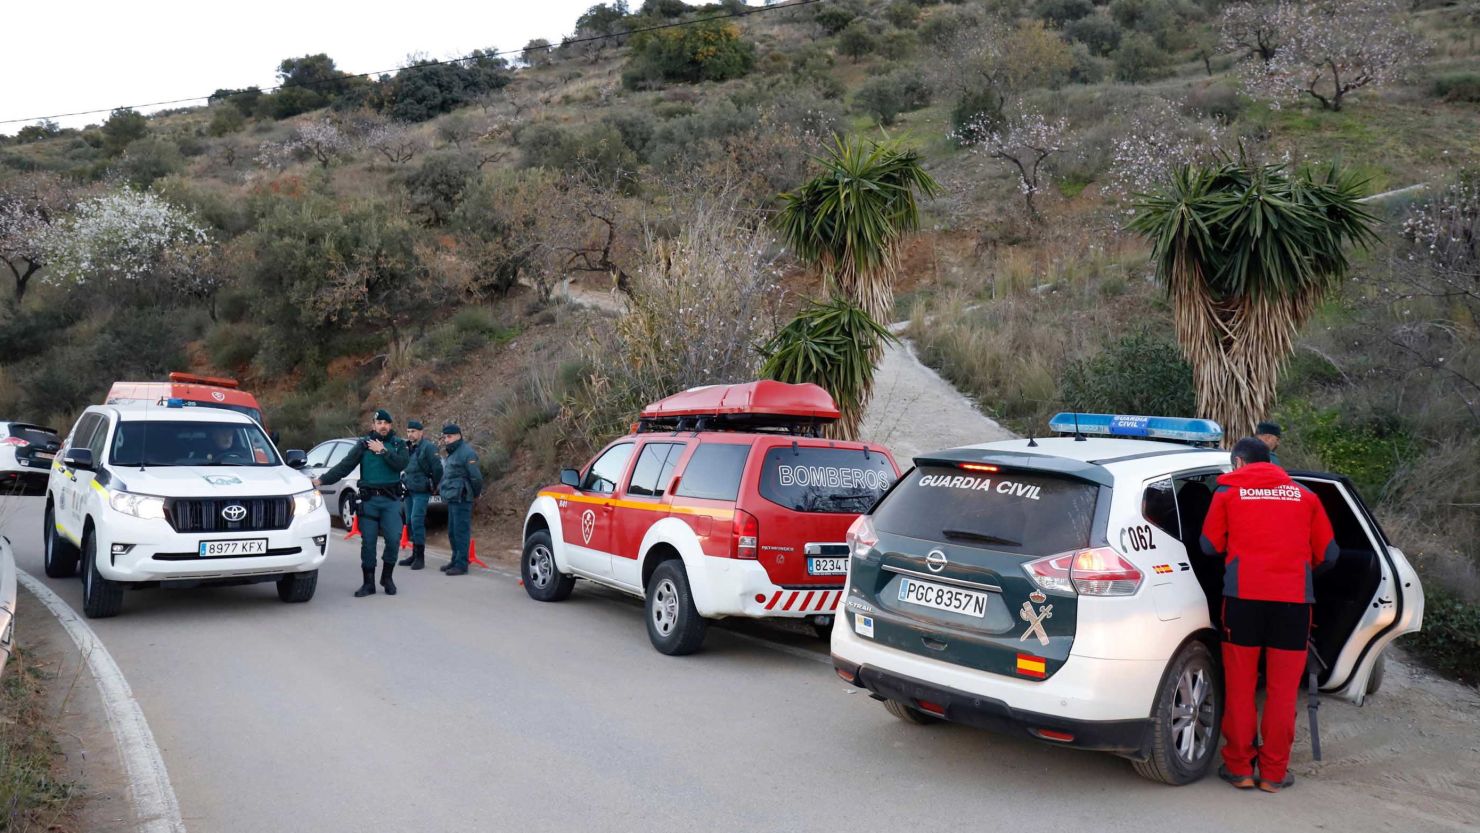 Guardia Civil officers are involved in the operation to rescue the toddler.